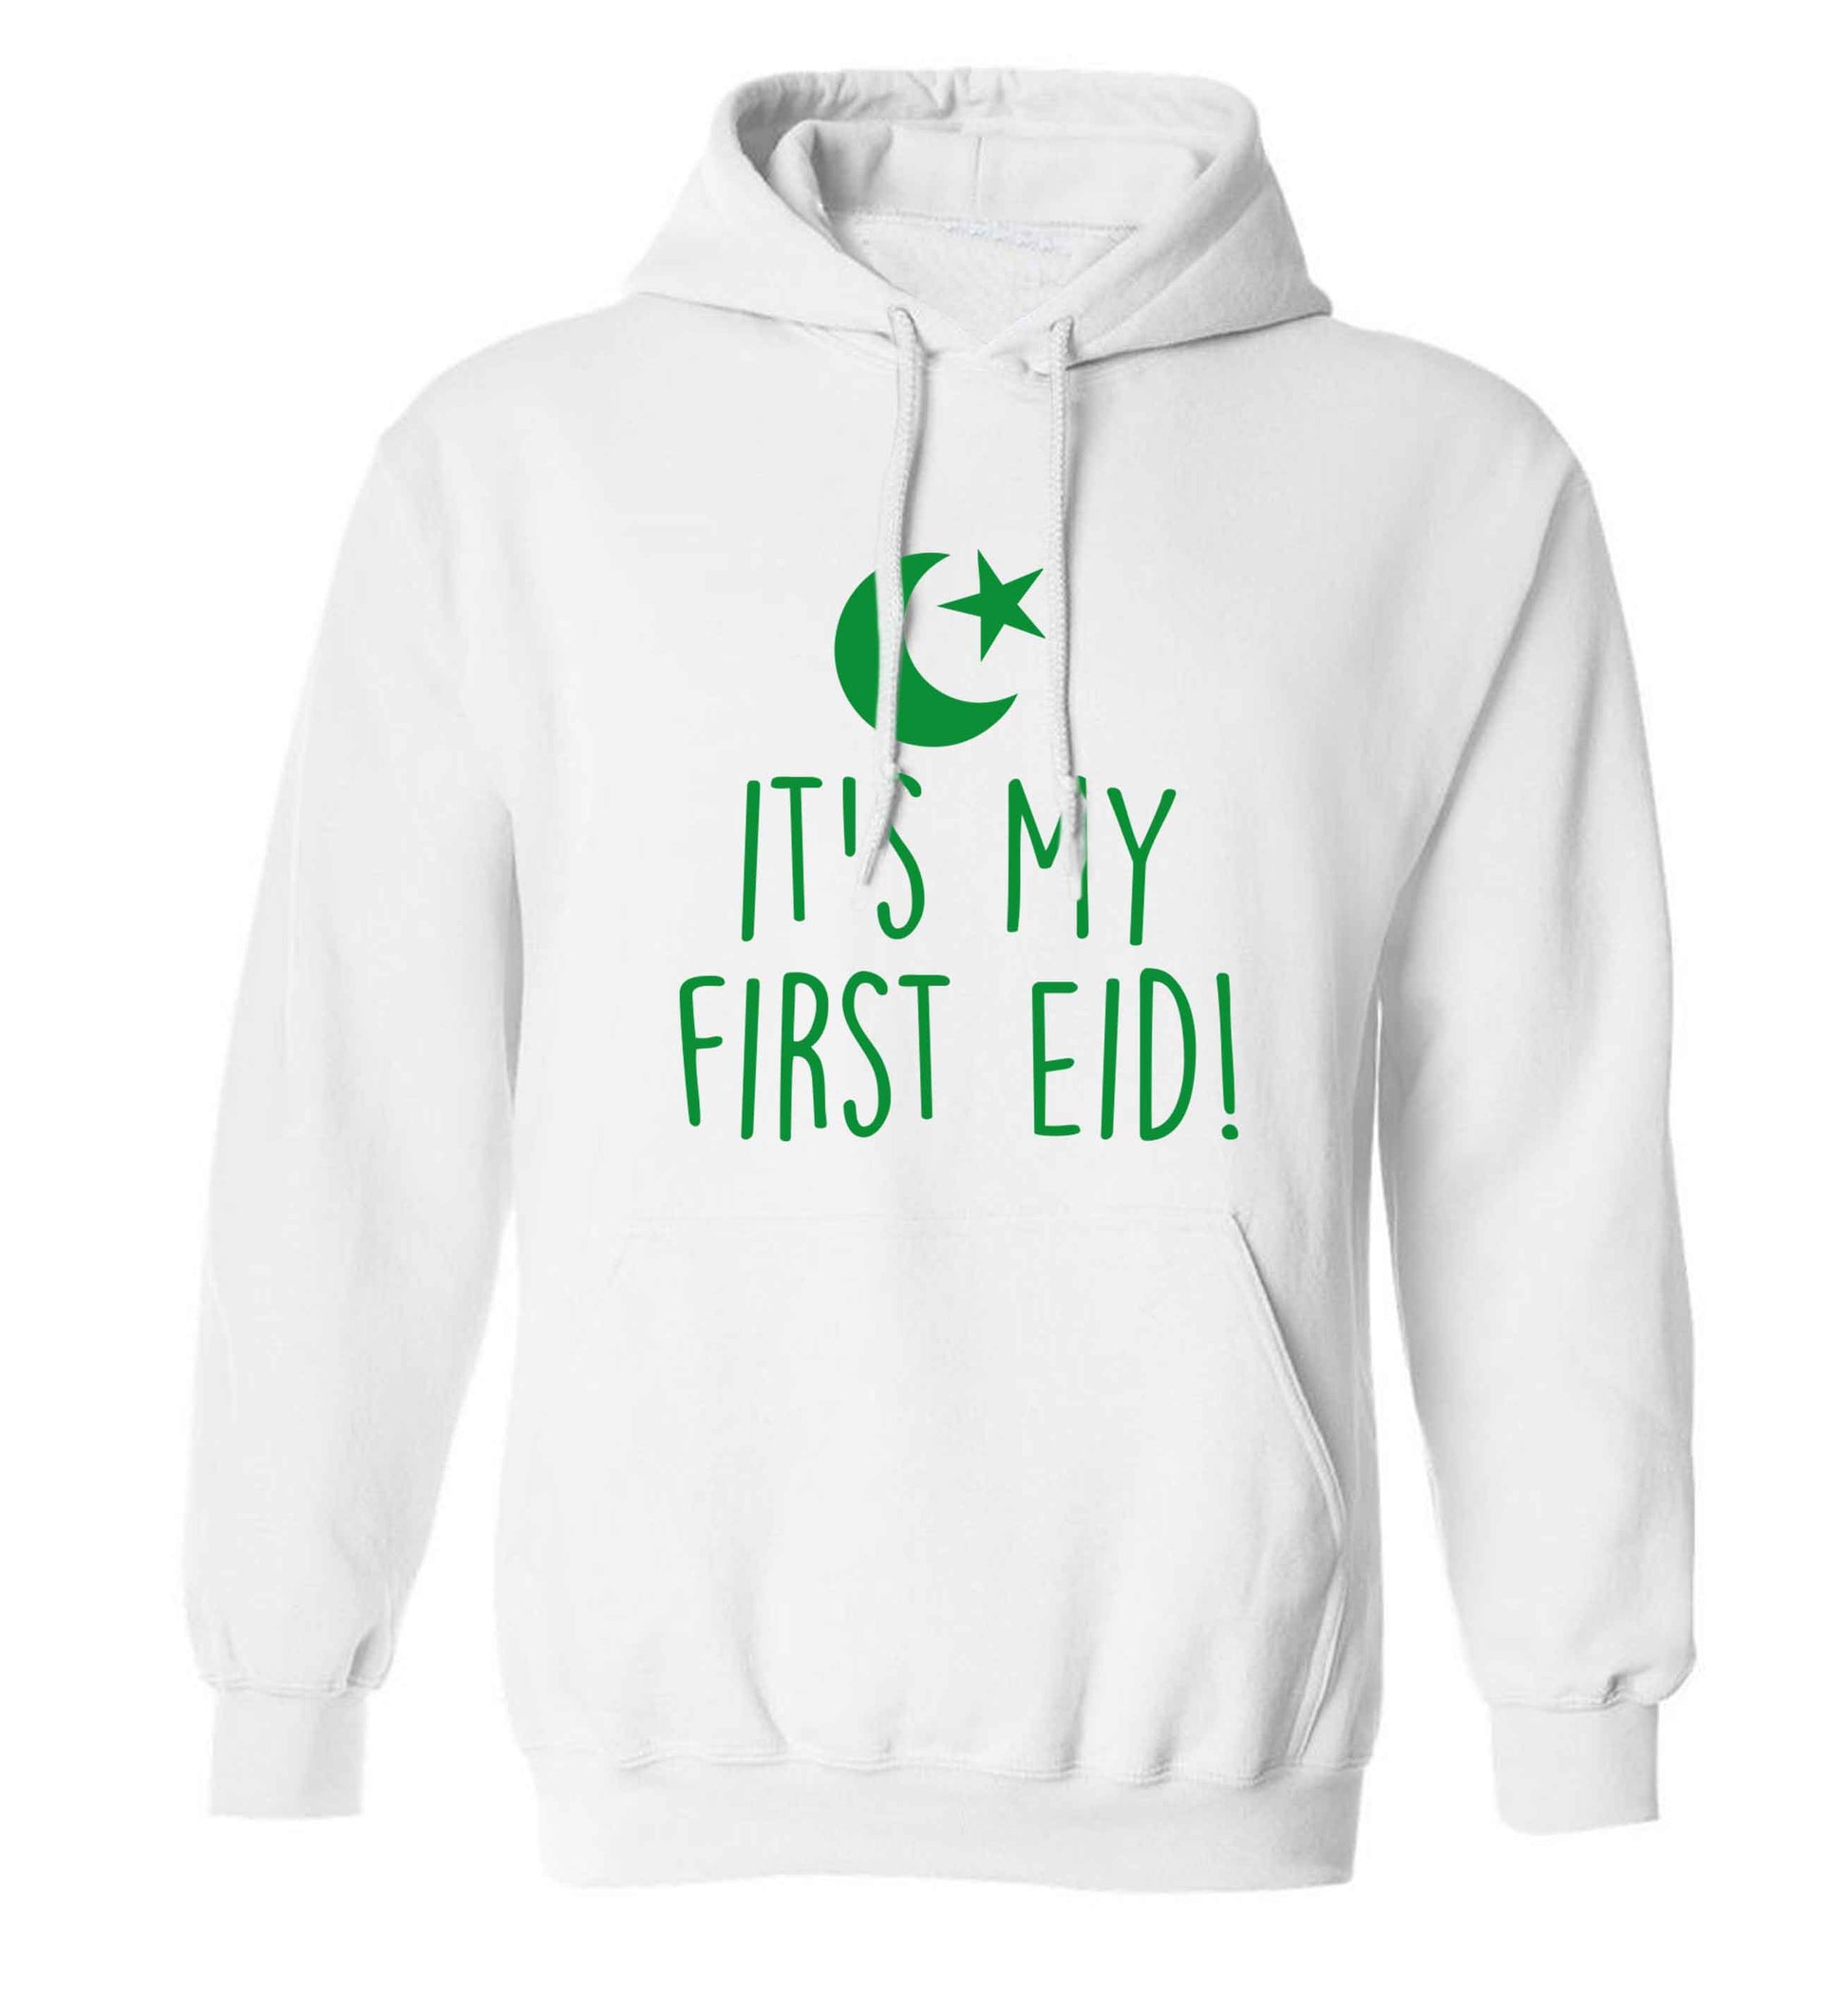 It's my first Eid adults unisex white hoodie 2XL